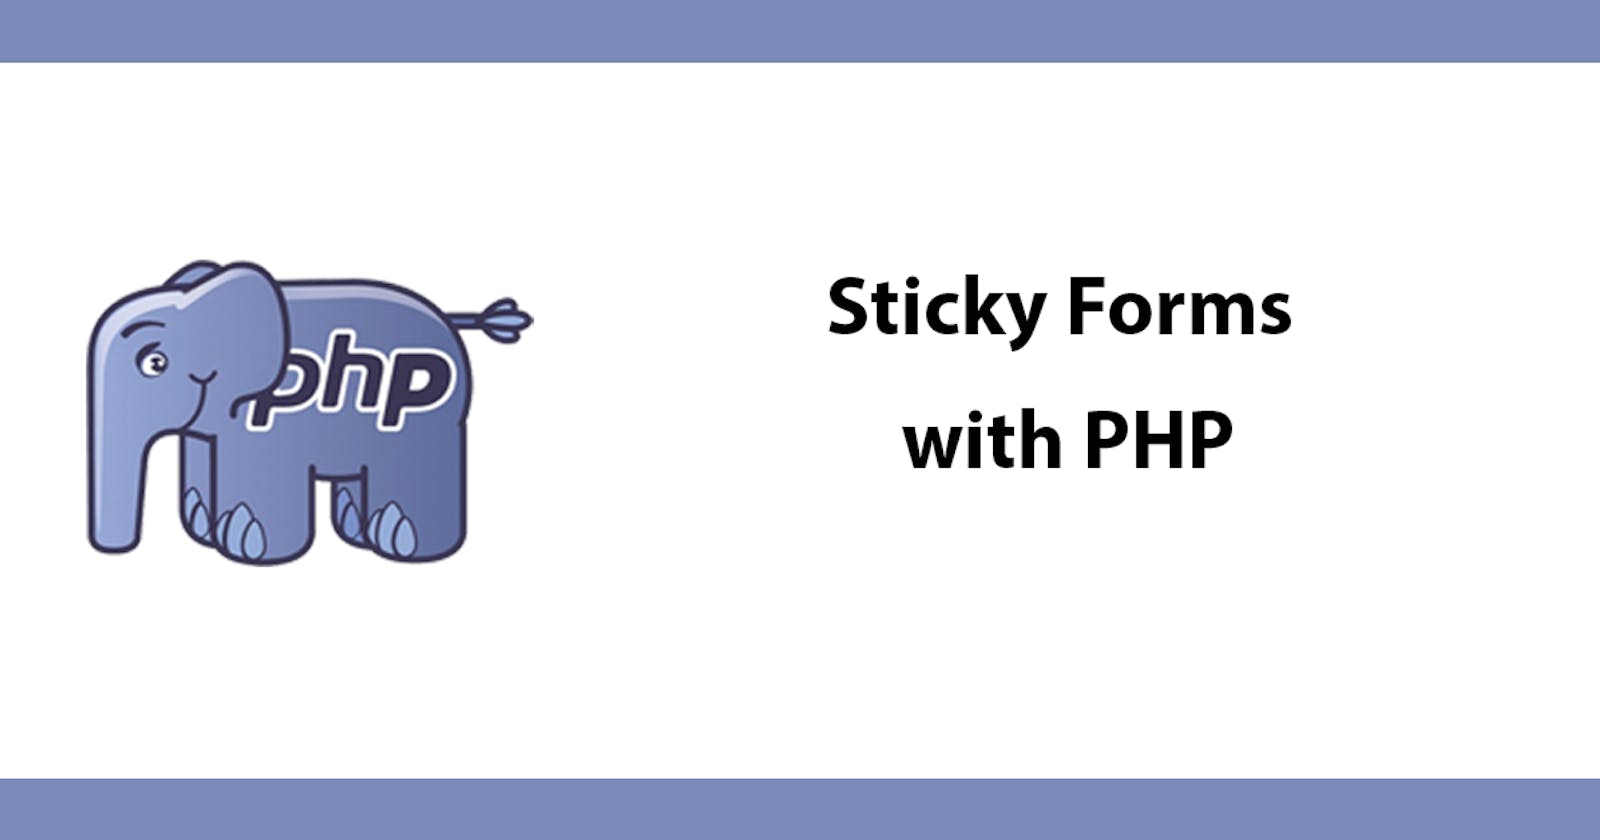 Sticky Forms with PHP